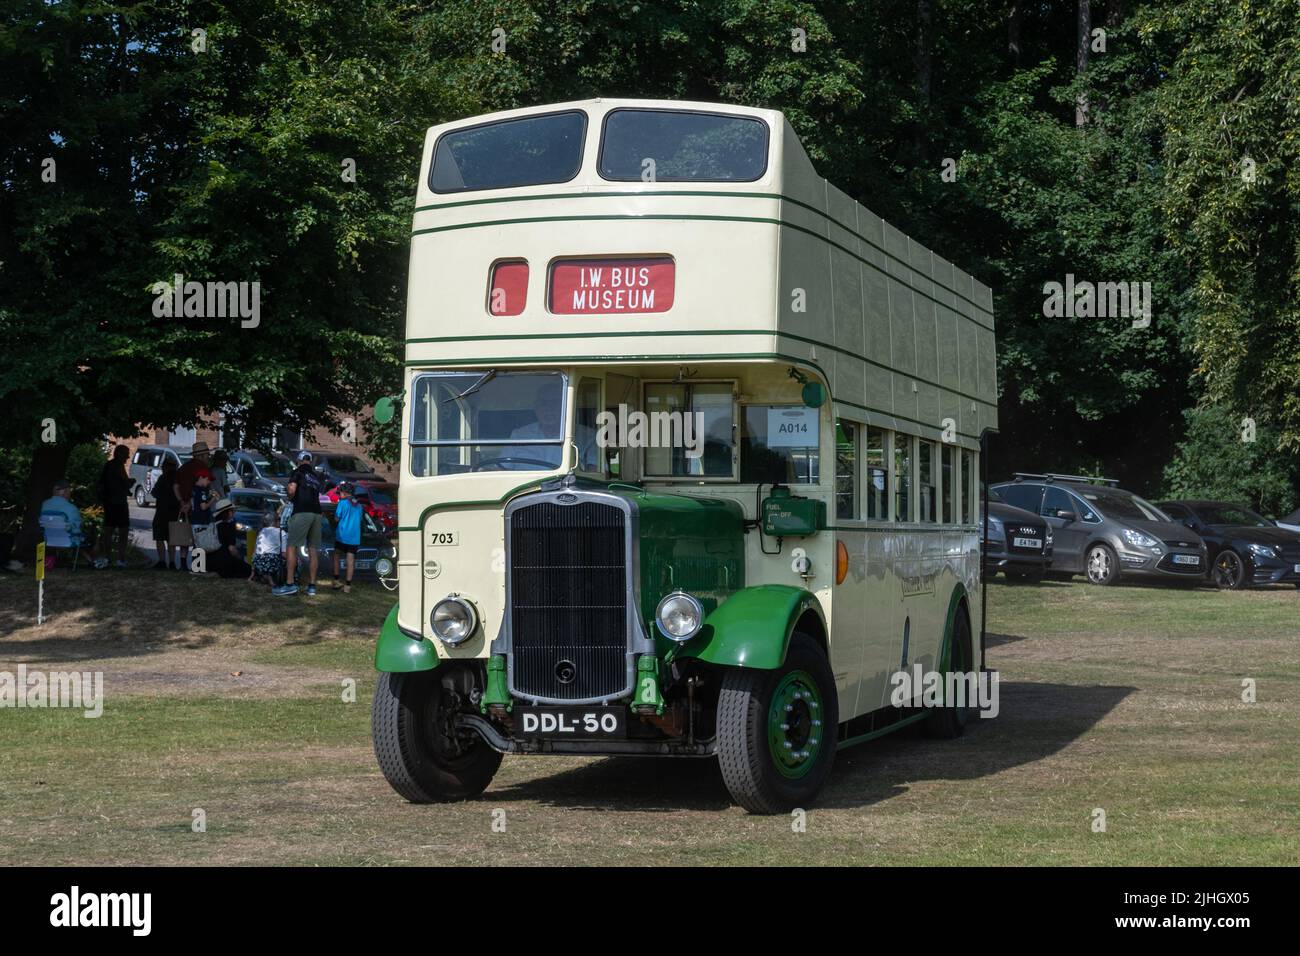 Vintage bus from the Isle of Wight bus museum entering Anstey Park for the Alton Bus Rally and Running Day, Hampshire, England, UK, in July 2022 Stock Photo